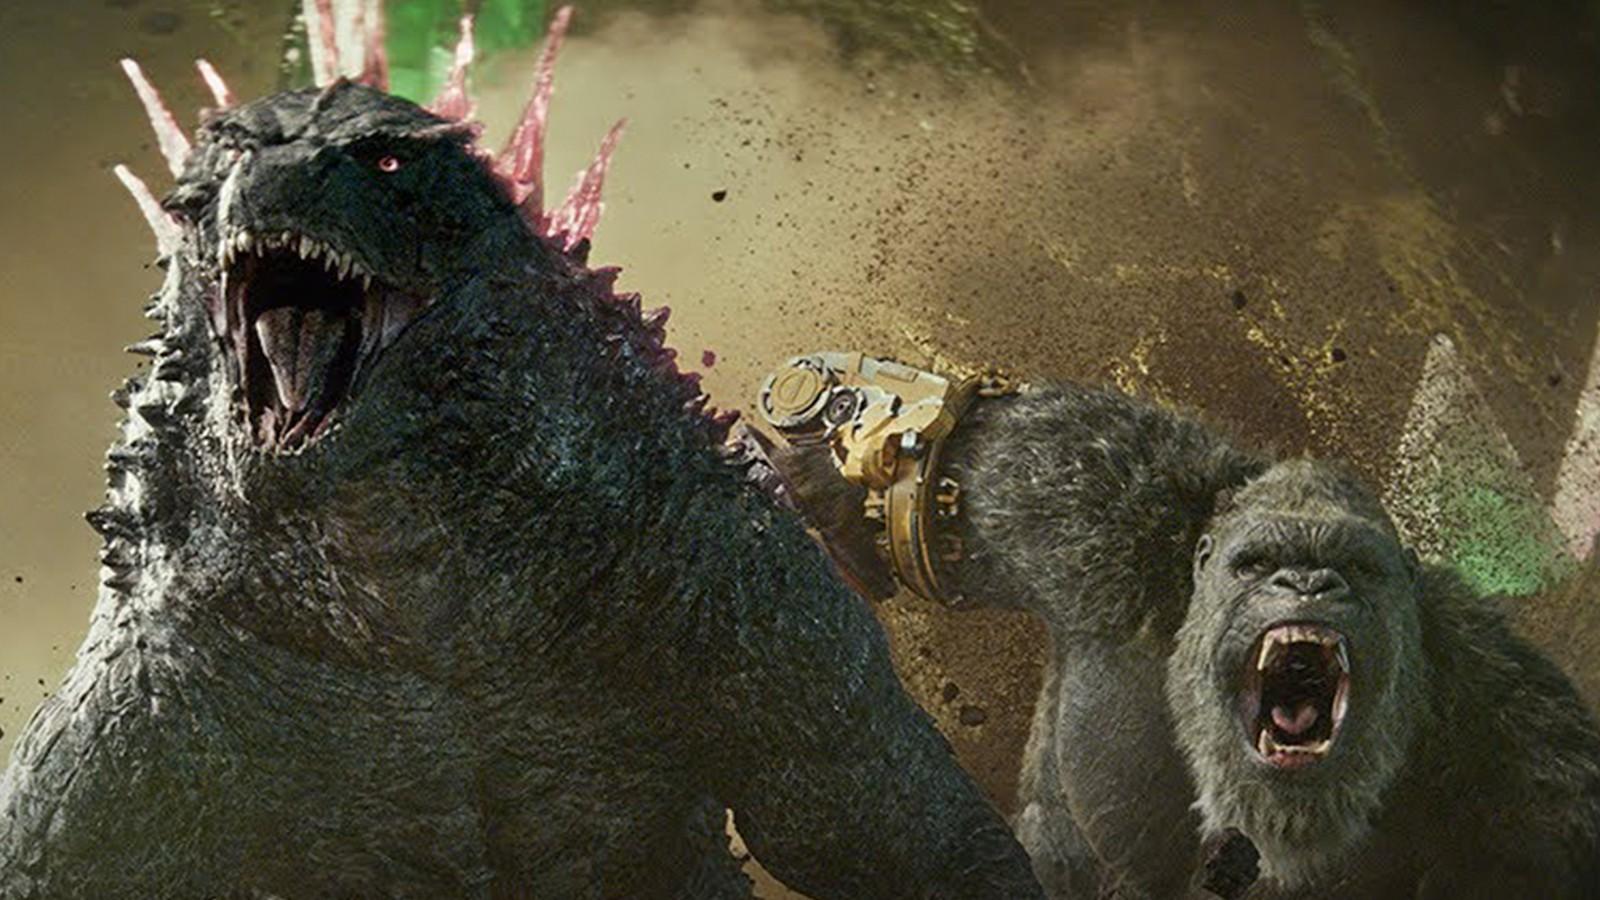 Godzilla and King Kong teaming up in The New Empire.